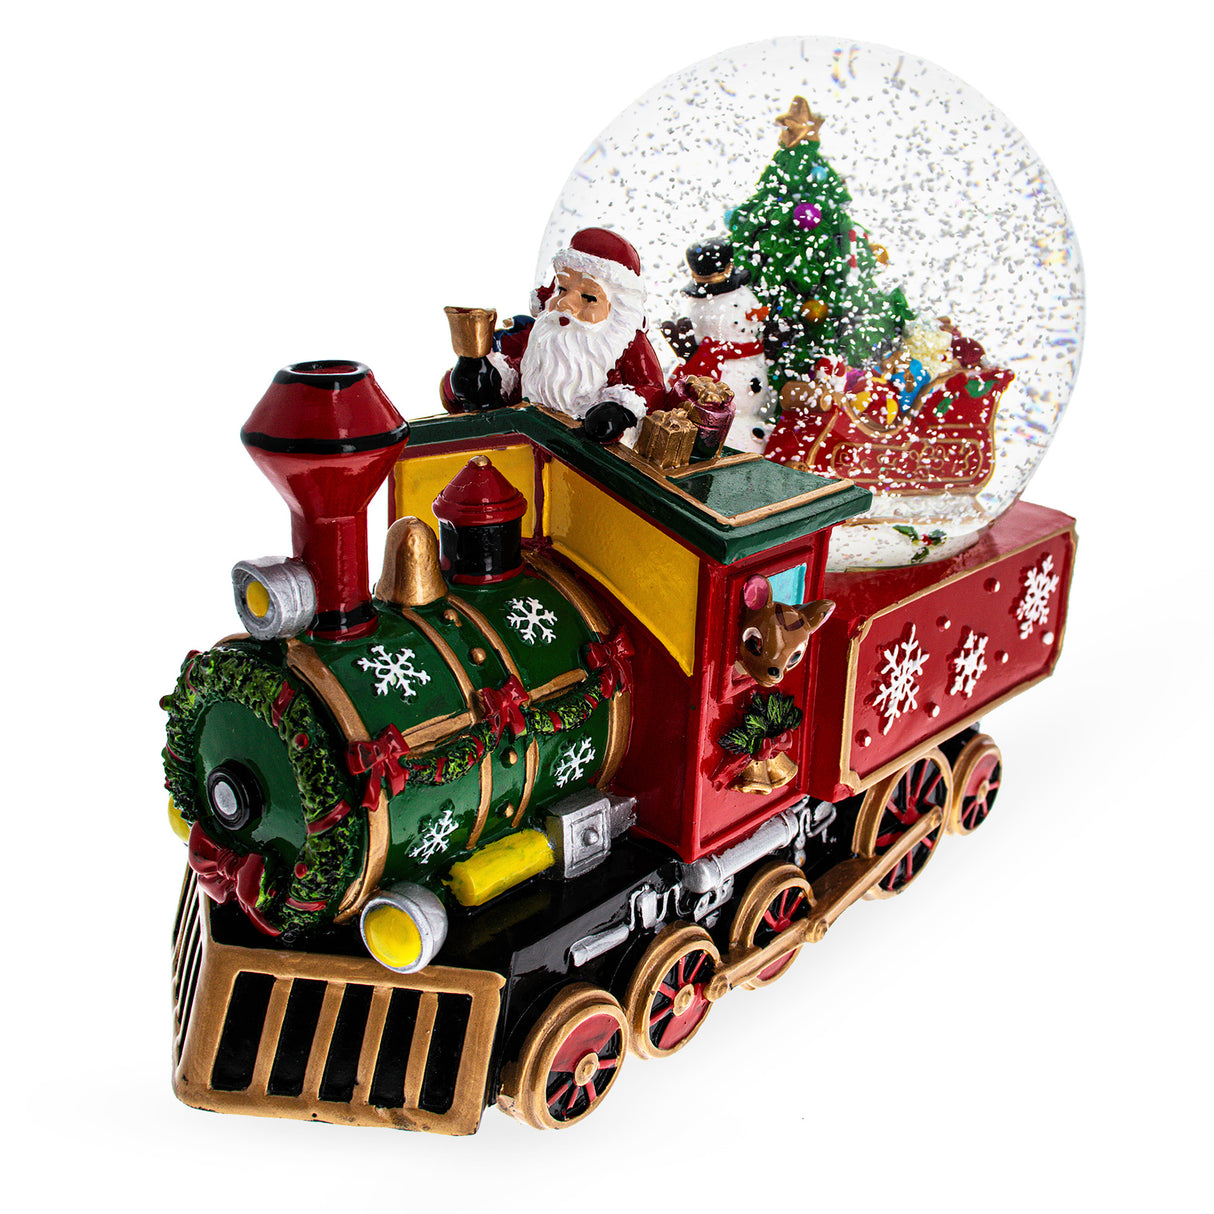 Festive Train Express: Musical Water Globe with Santa, Snowman, and Reindeer Delivering Tree ,dimensions in inches: 7.2 x 7.9 x 3.85